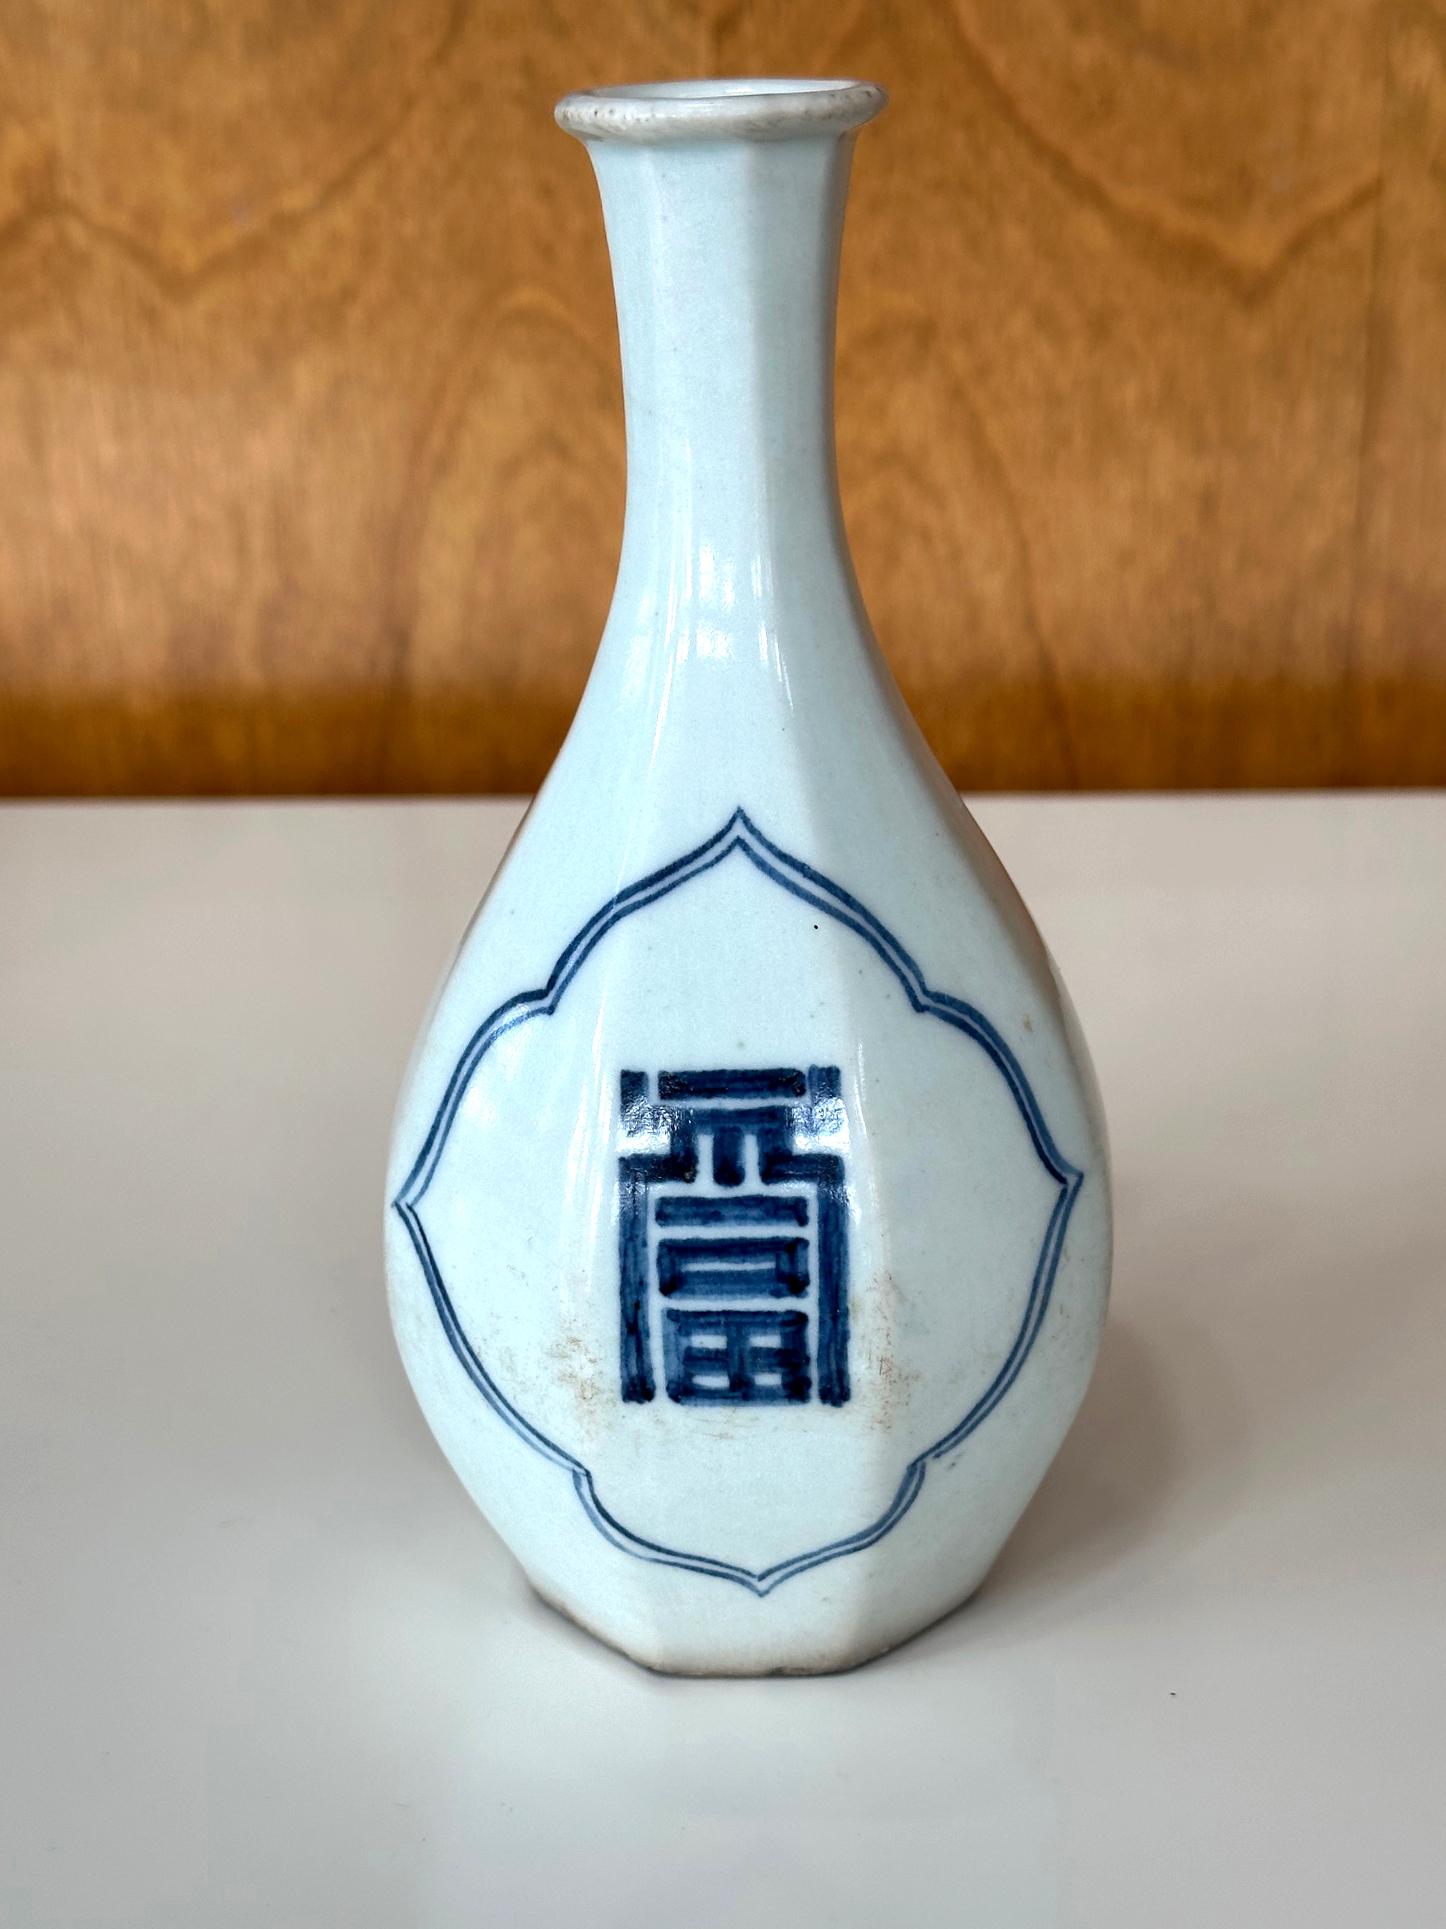 Korean Ceramic Faceted Blue and White Bottle Vase Joseon Dynasty In Good Condition For Sale In Atlanta, GA